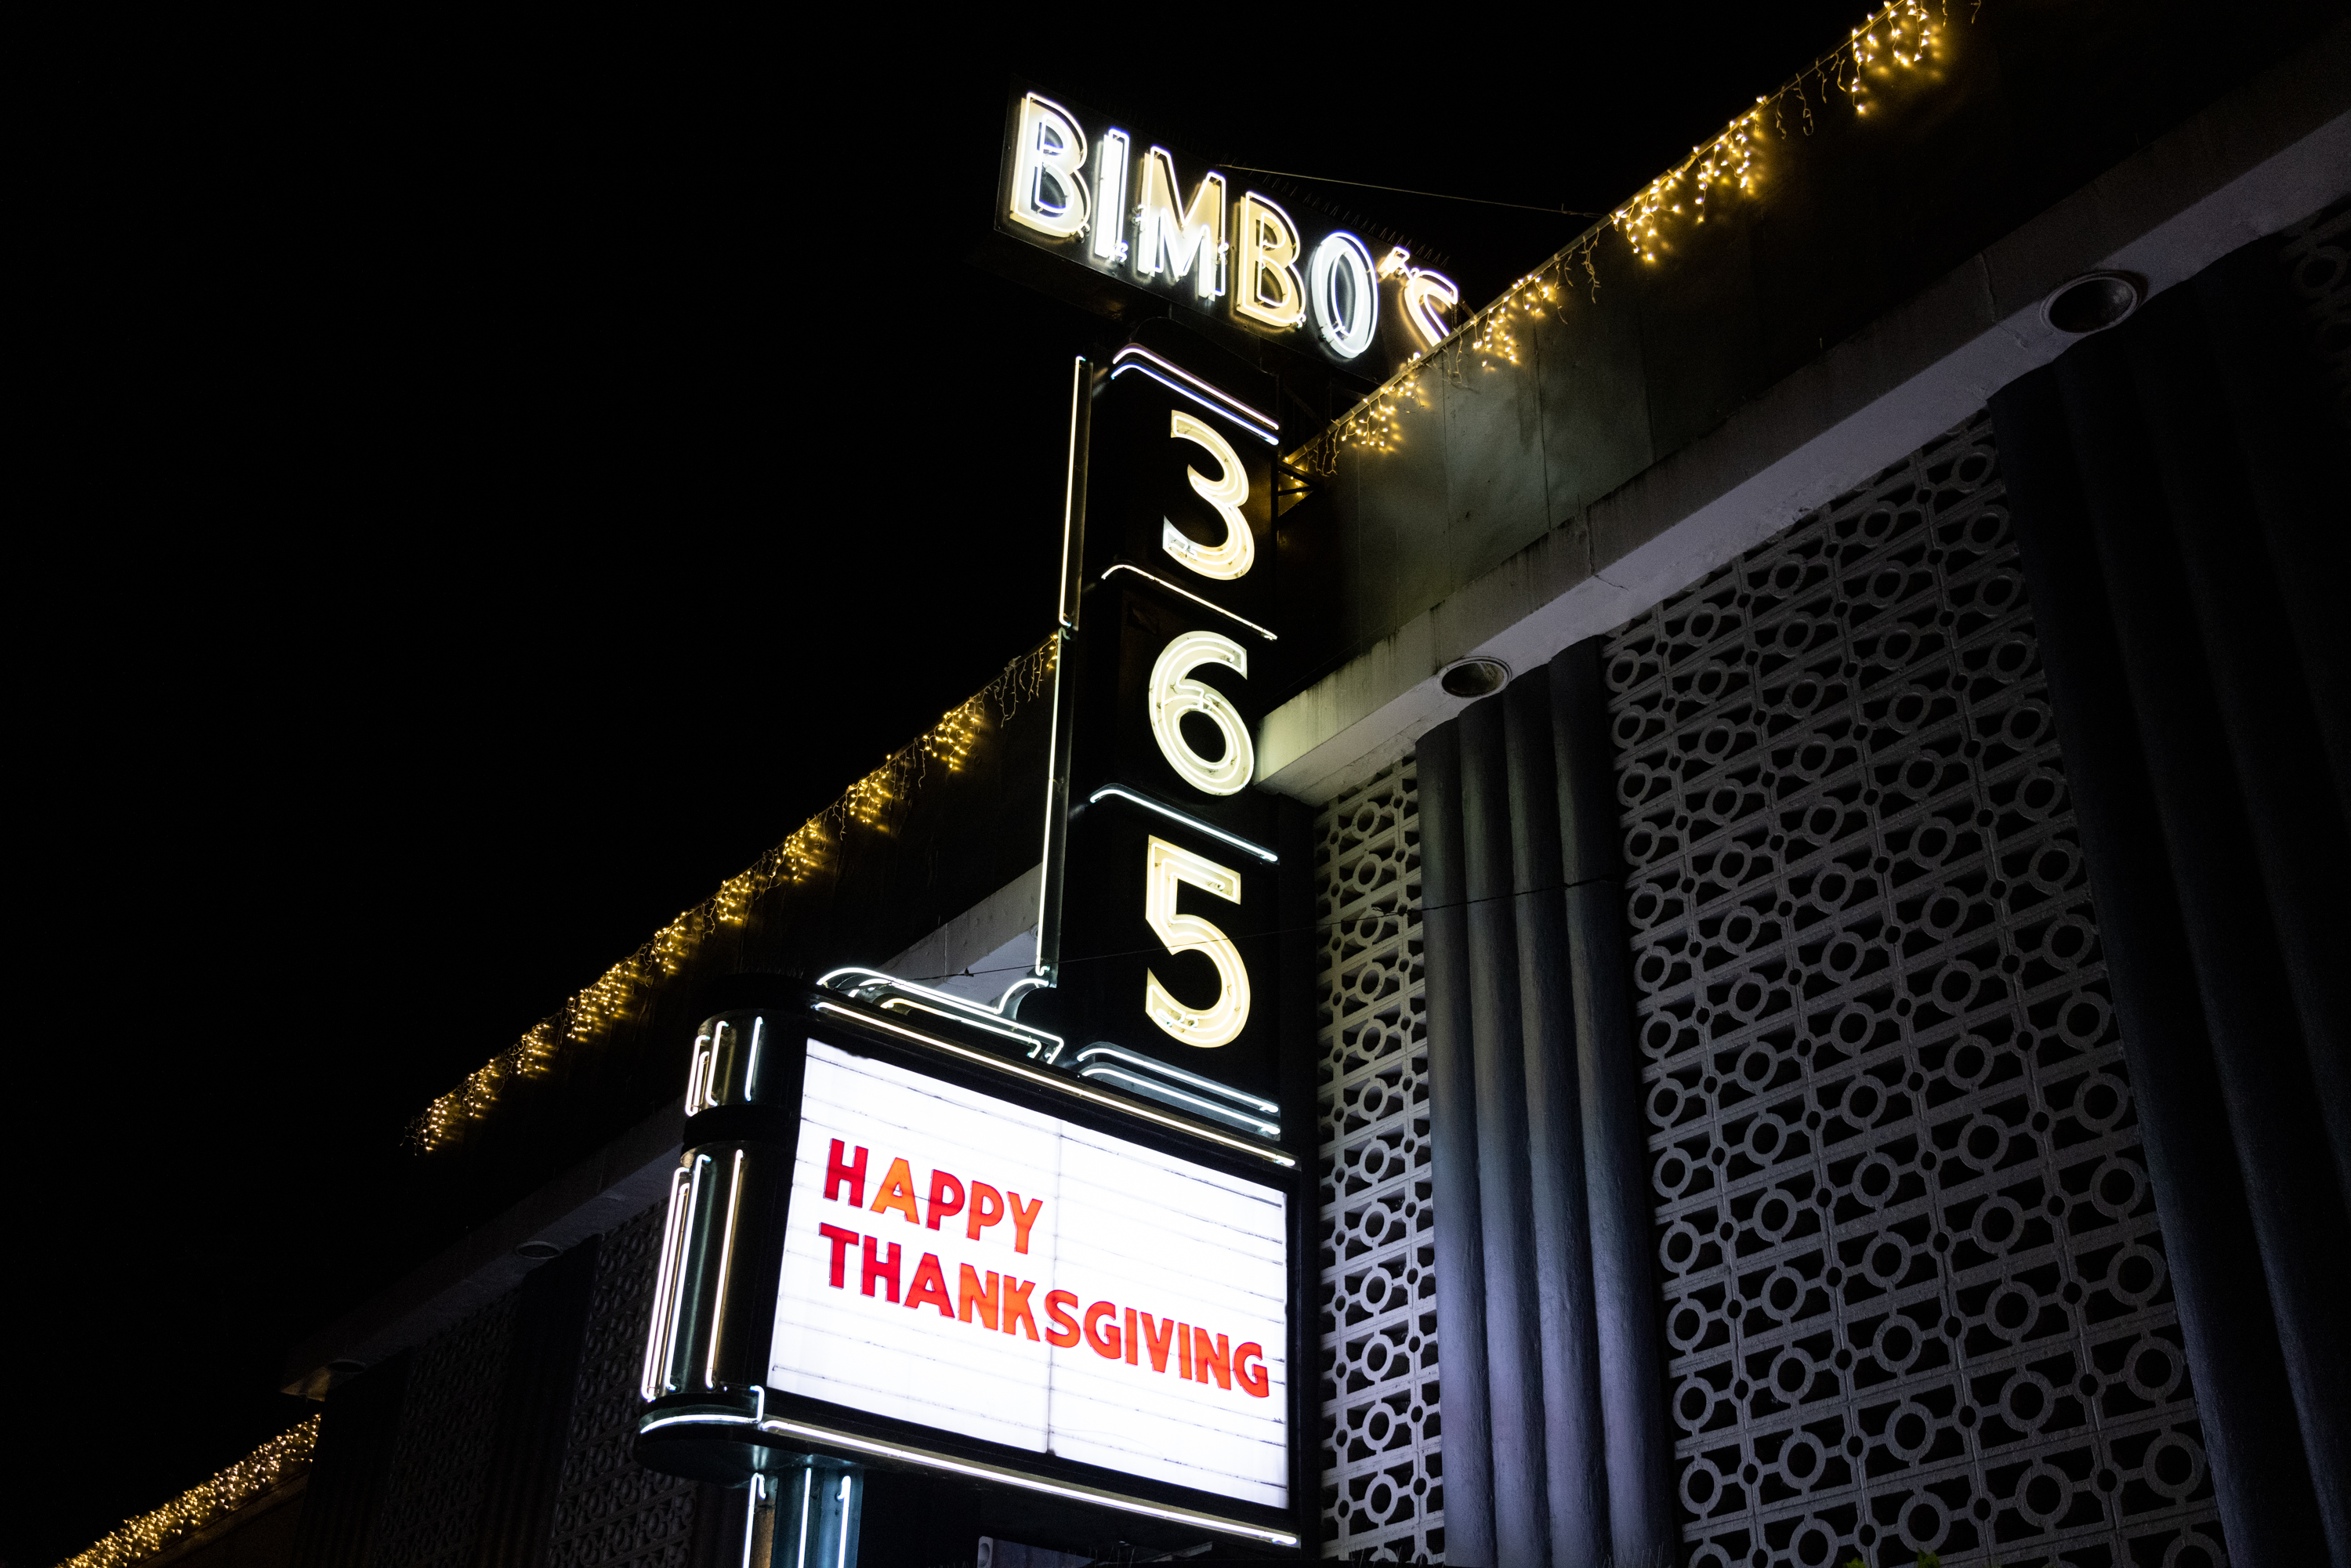 A neon sign at night with the words &quot;Bimbo’s 365&quot; and &quot;HAPPY THANKSGIVING&quot; on the marquee